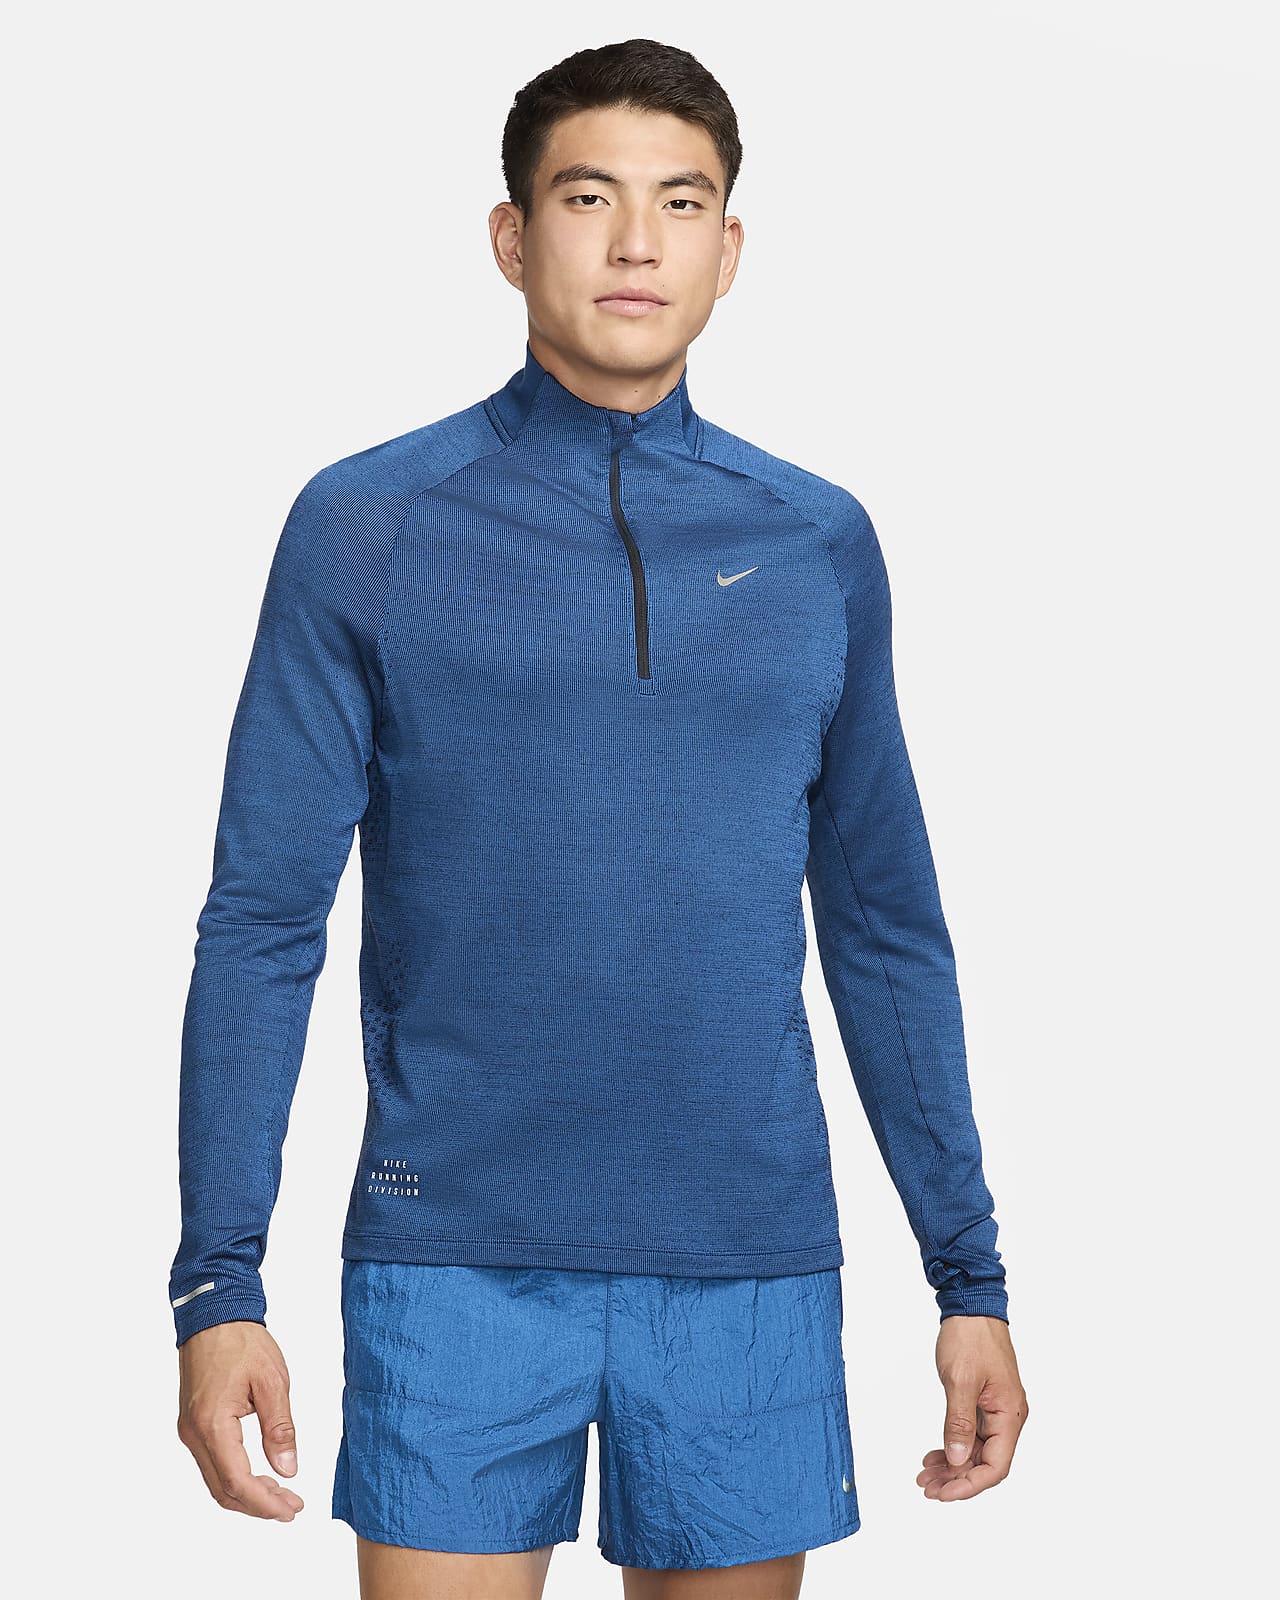 Nike Running Division Men's Therma-FIT ADV Running Top